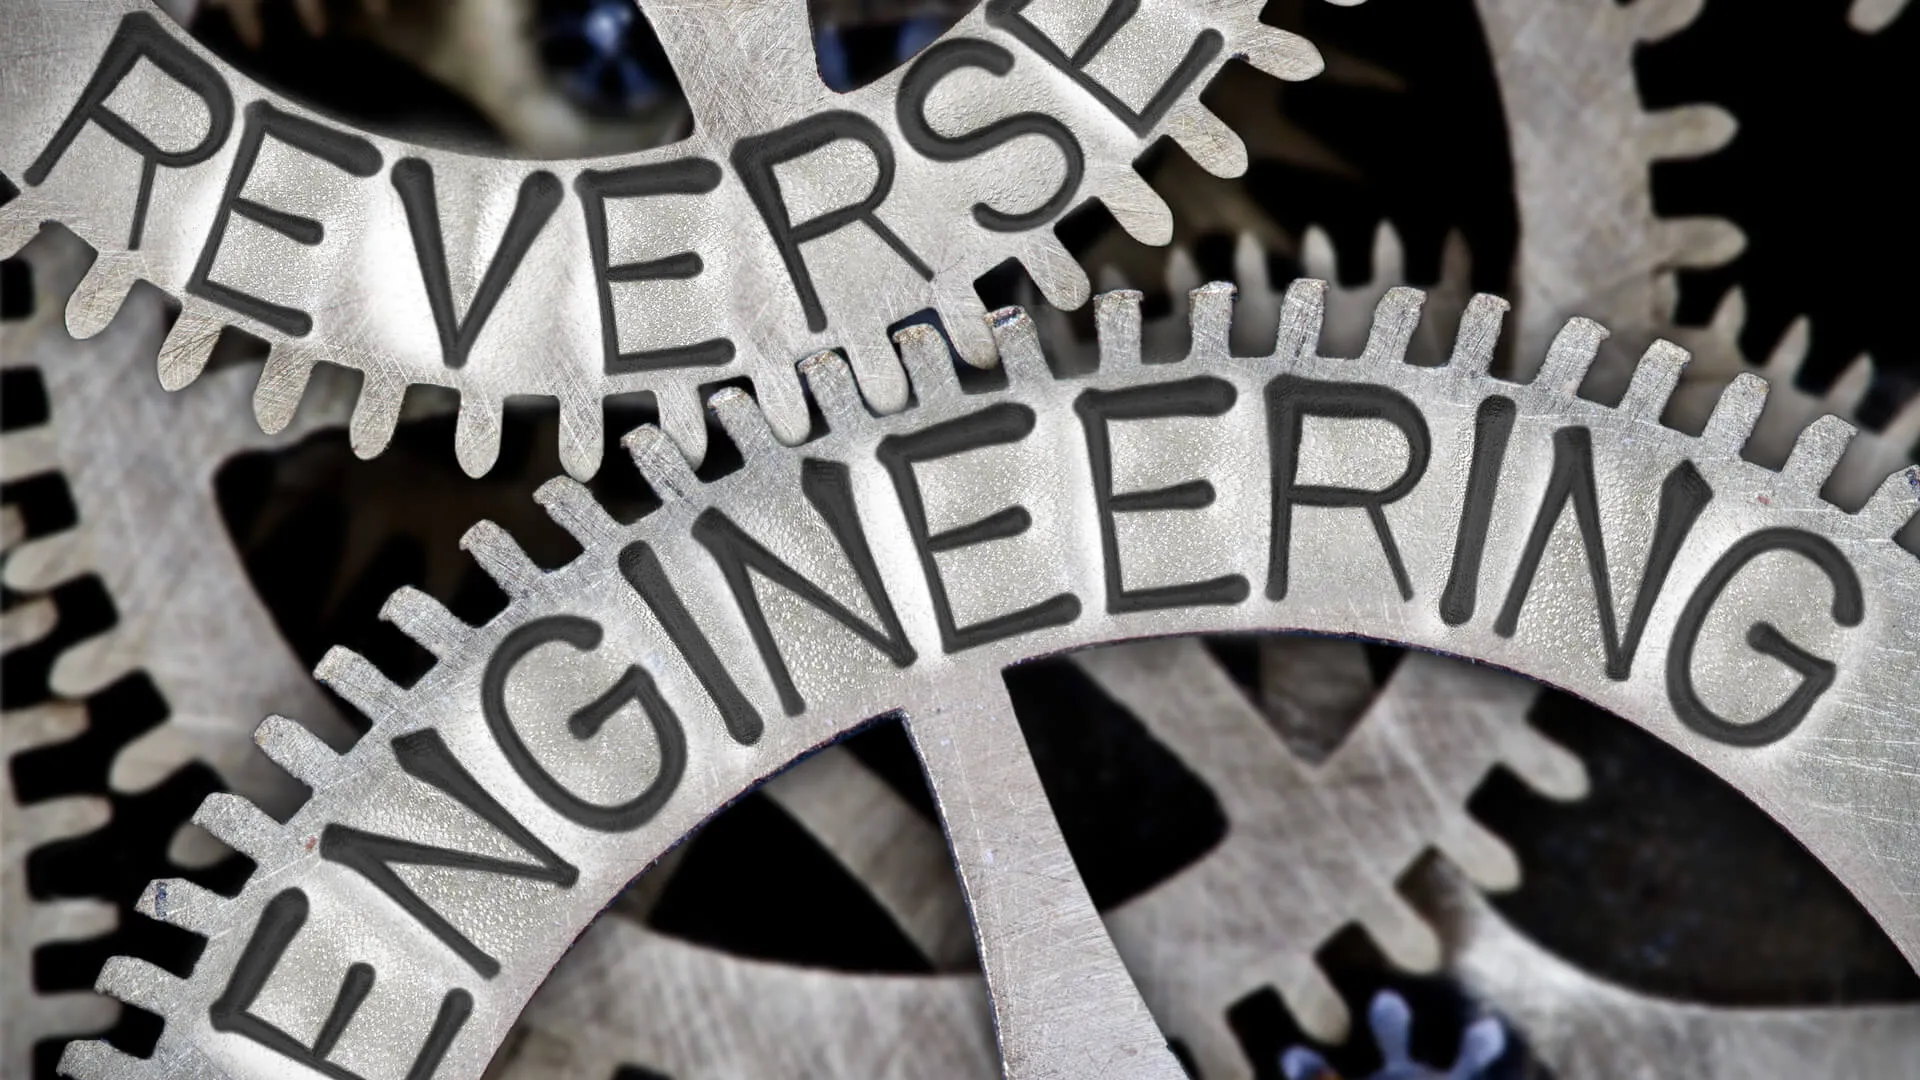 Top Secrets about working as a Reverse freelance engineer